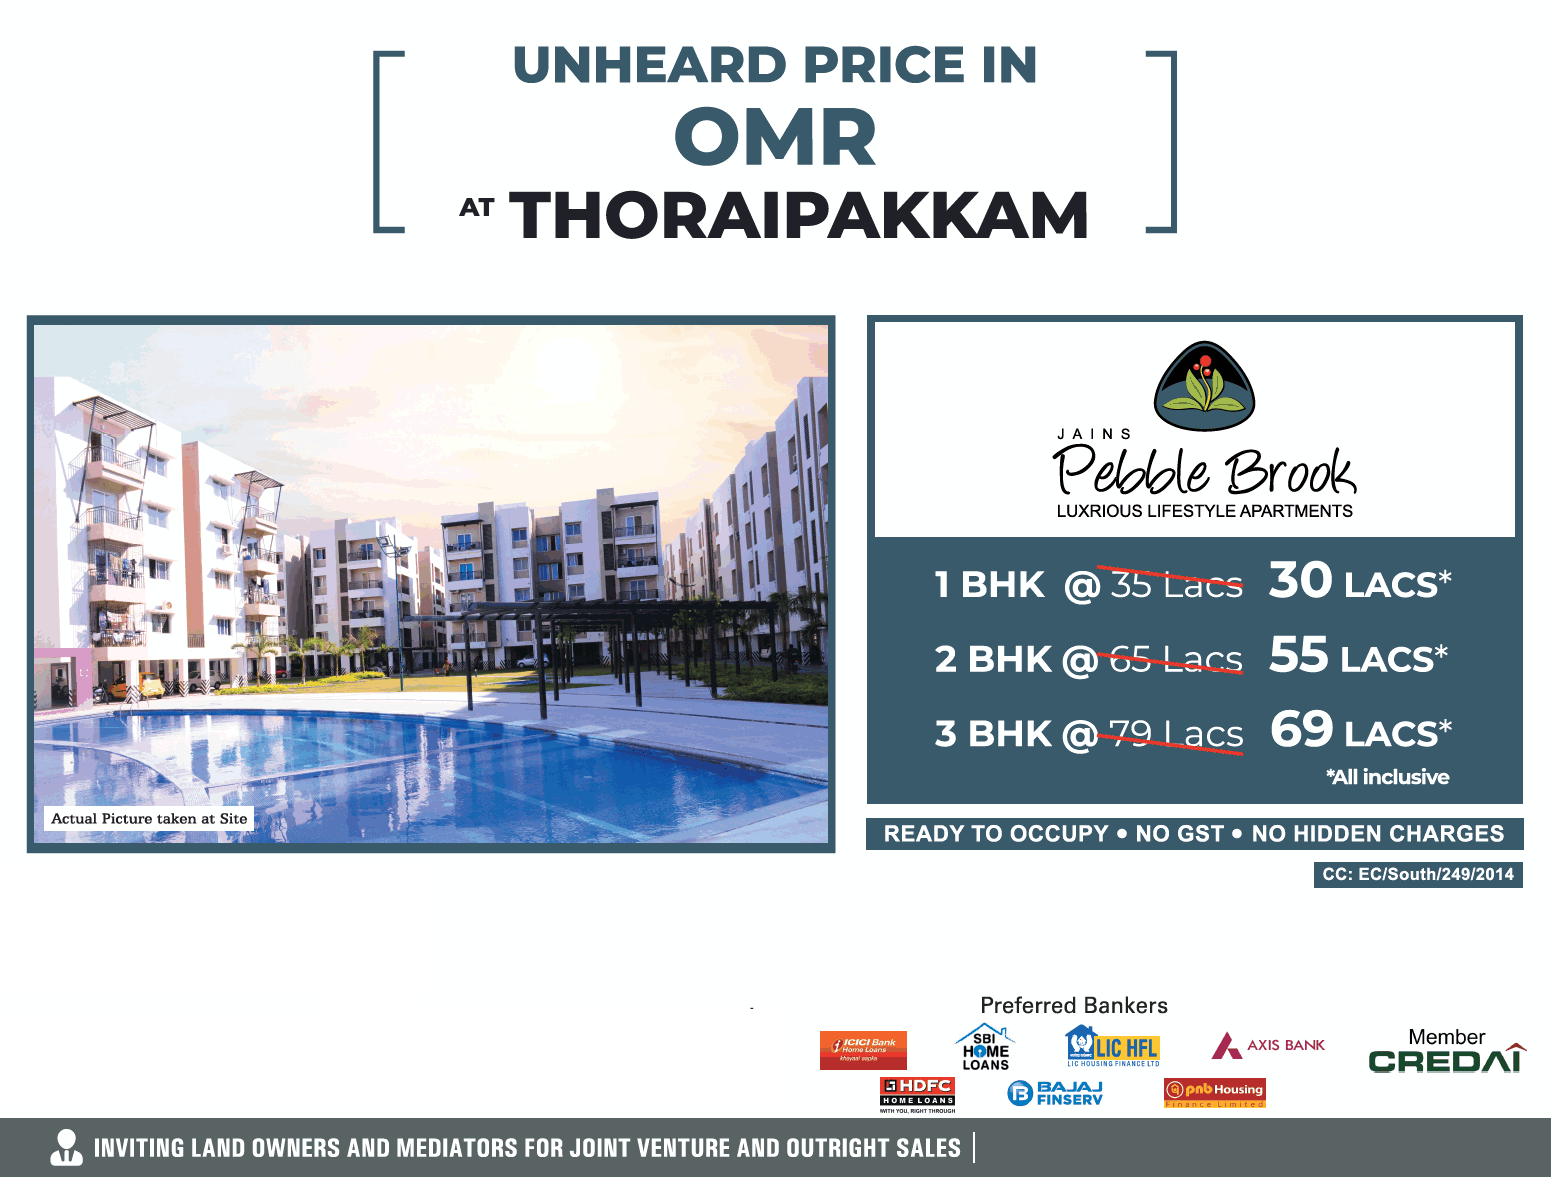 Ready to occupy, no GST, no hidden charges at Jain Pebble Brook, Chennai